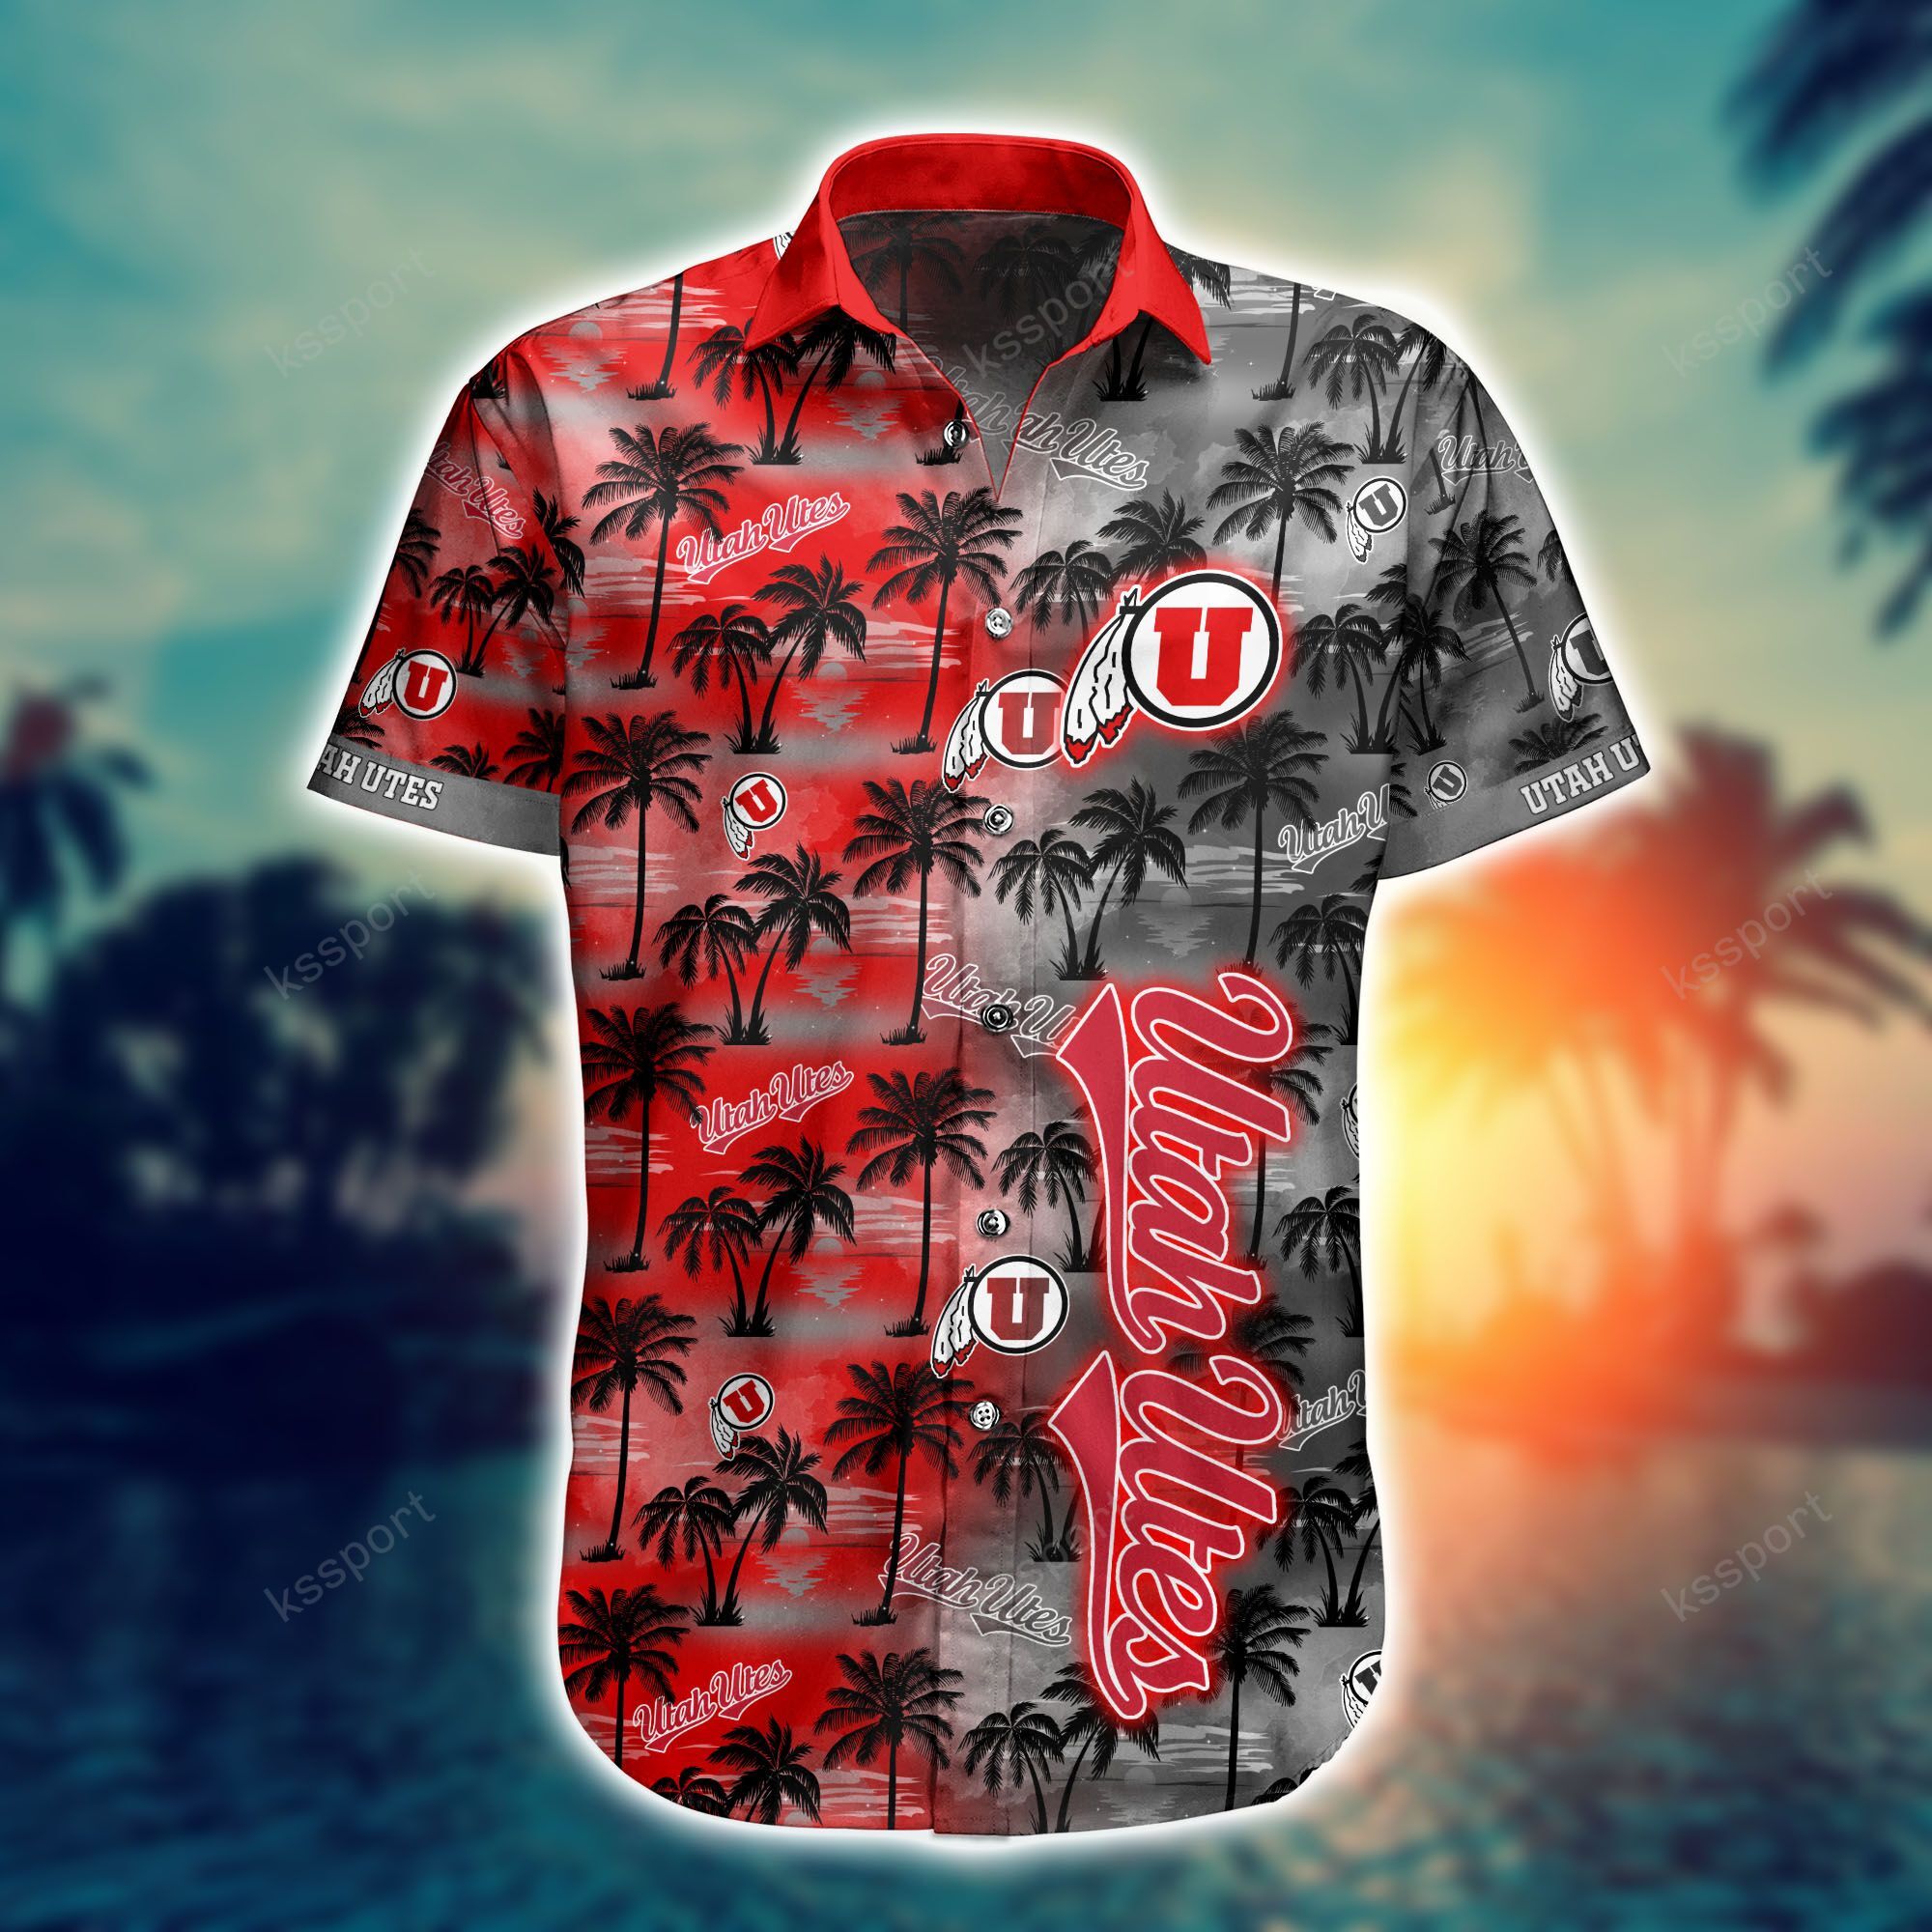 Top cool Hawaiian shirt 2022 - Make sure you get yours today before they run out! 112